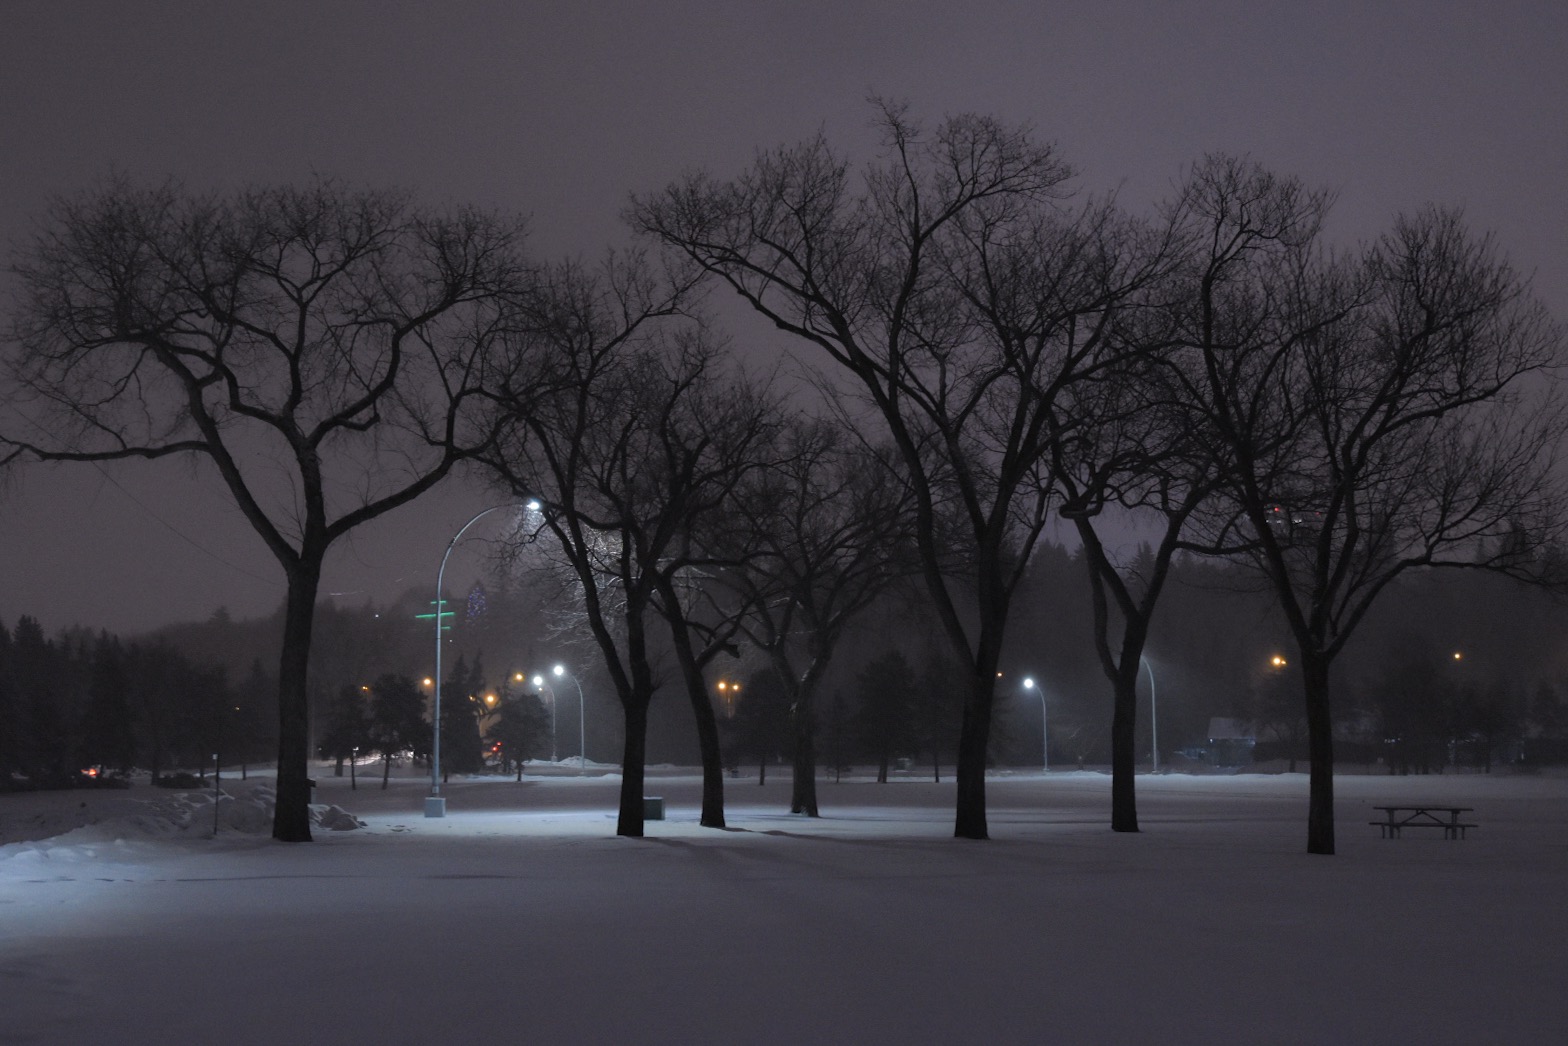 A scene of bare trees and ground covered in snow with street lamps providing spot lighting in the background